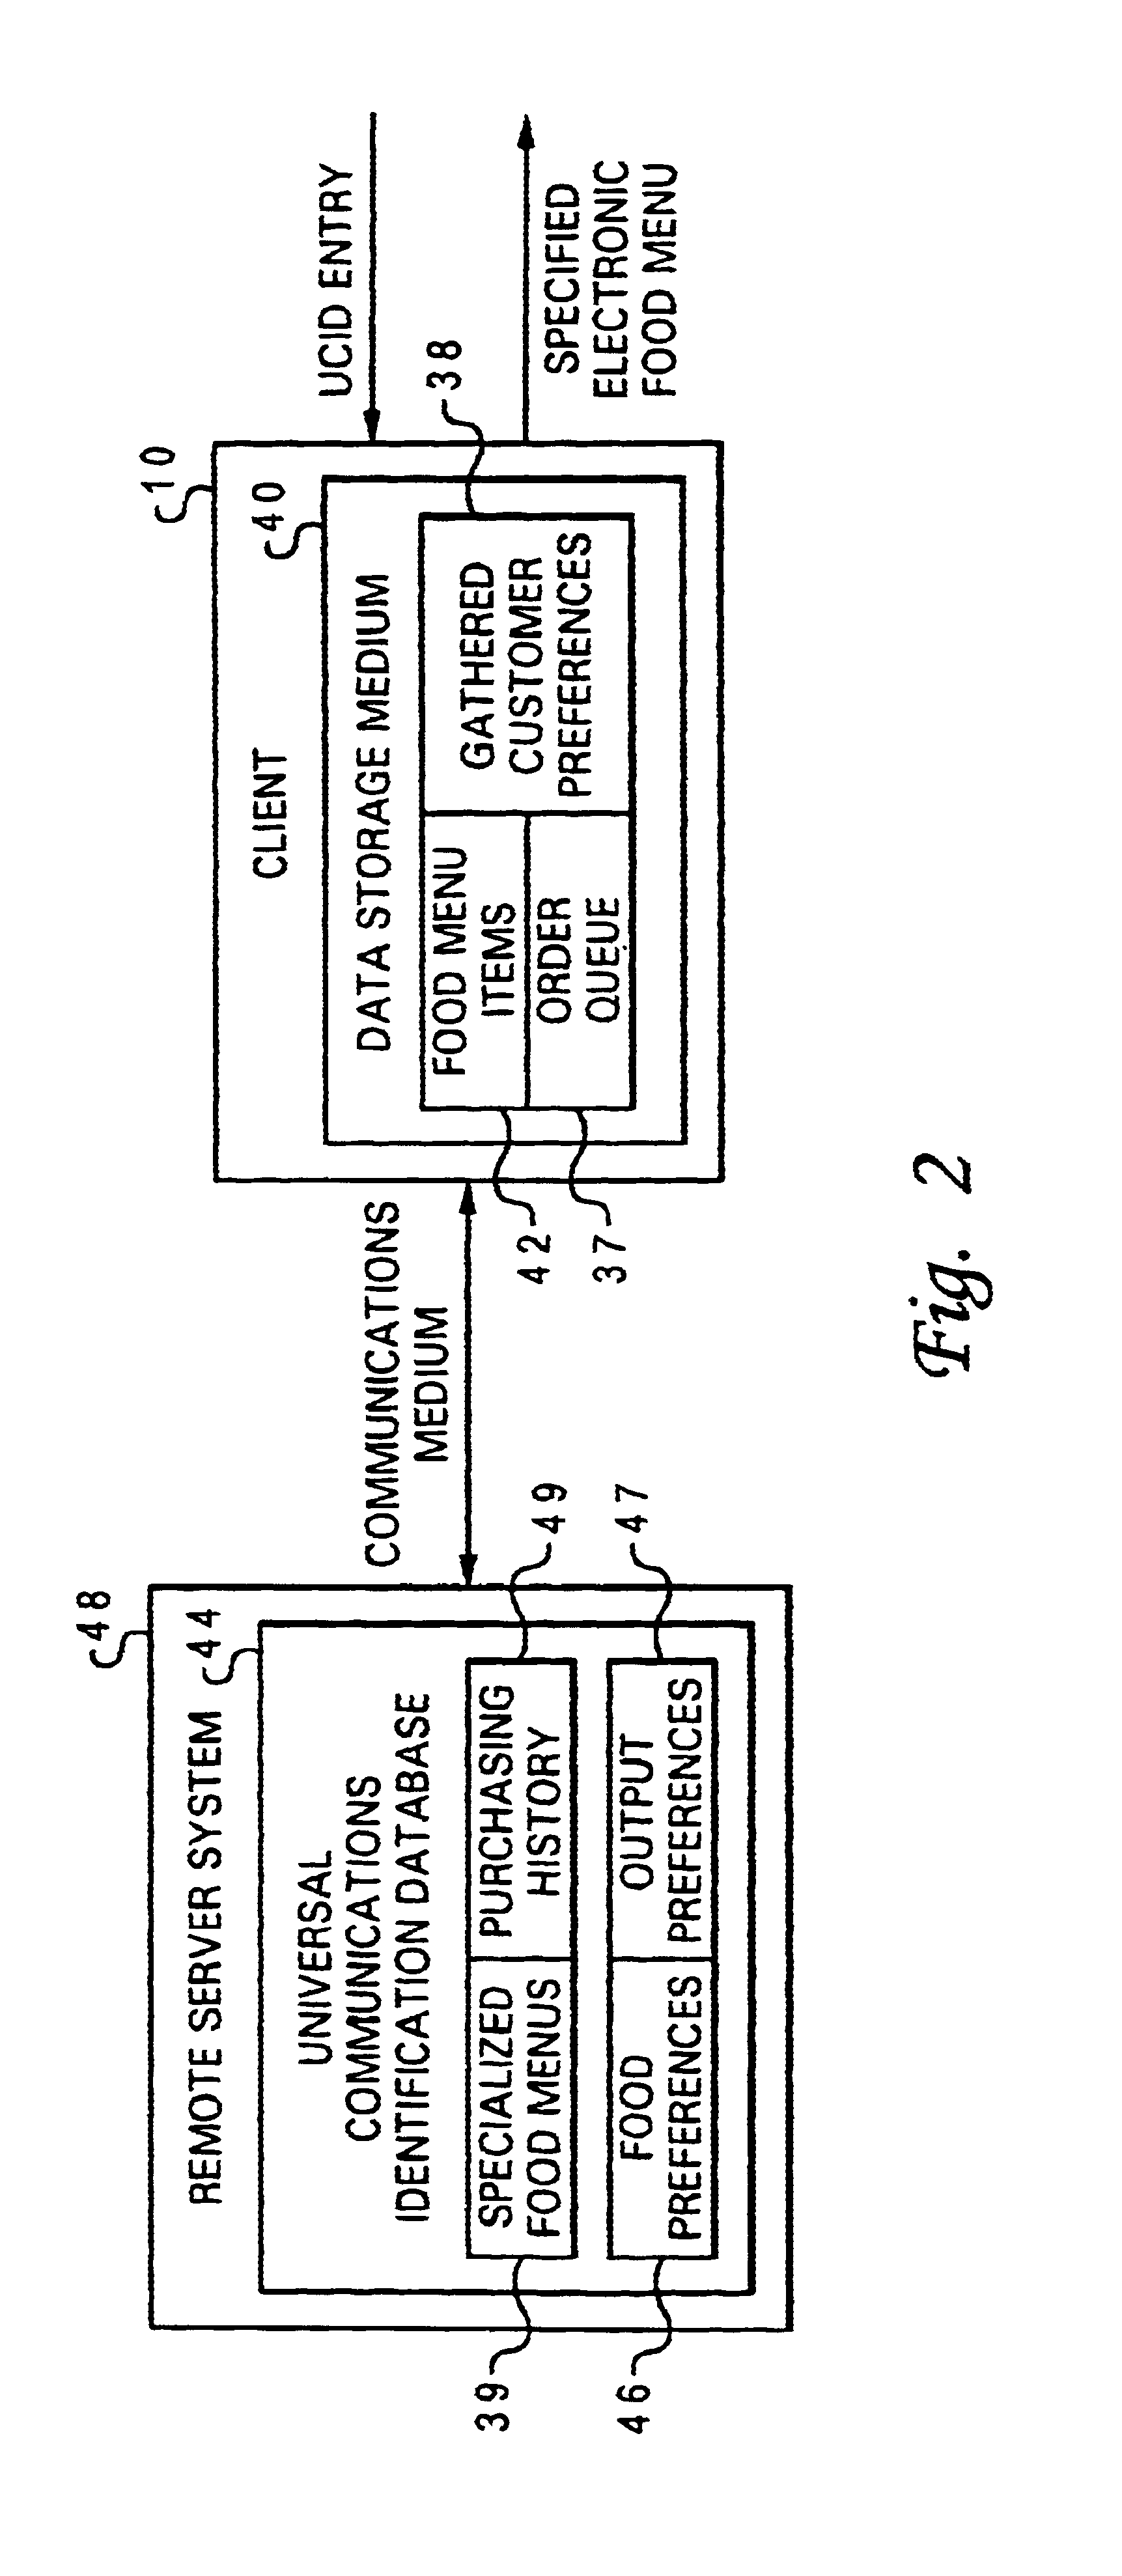 Method, system and program for specifying an electronic food menu with food preferences from a universally accessible database